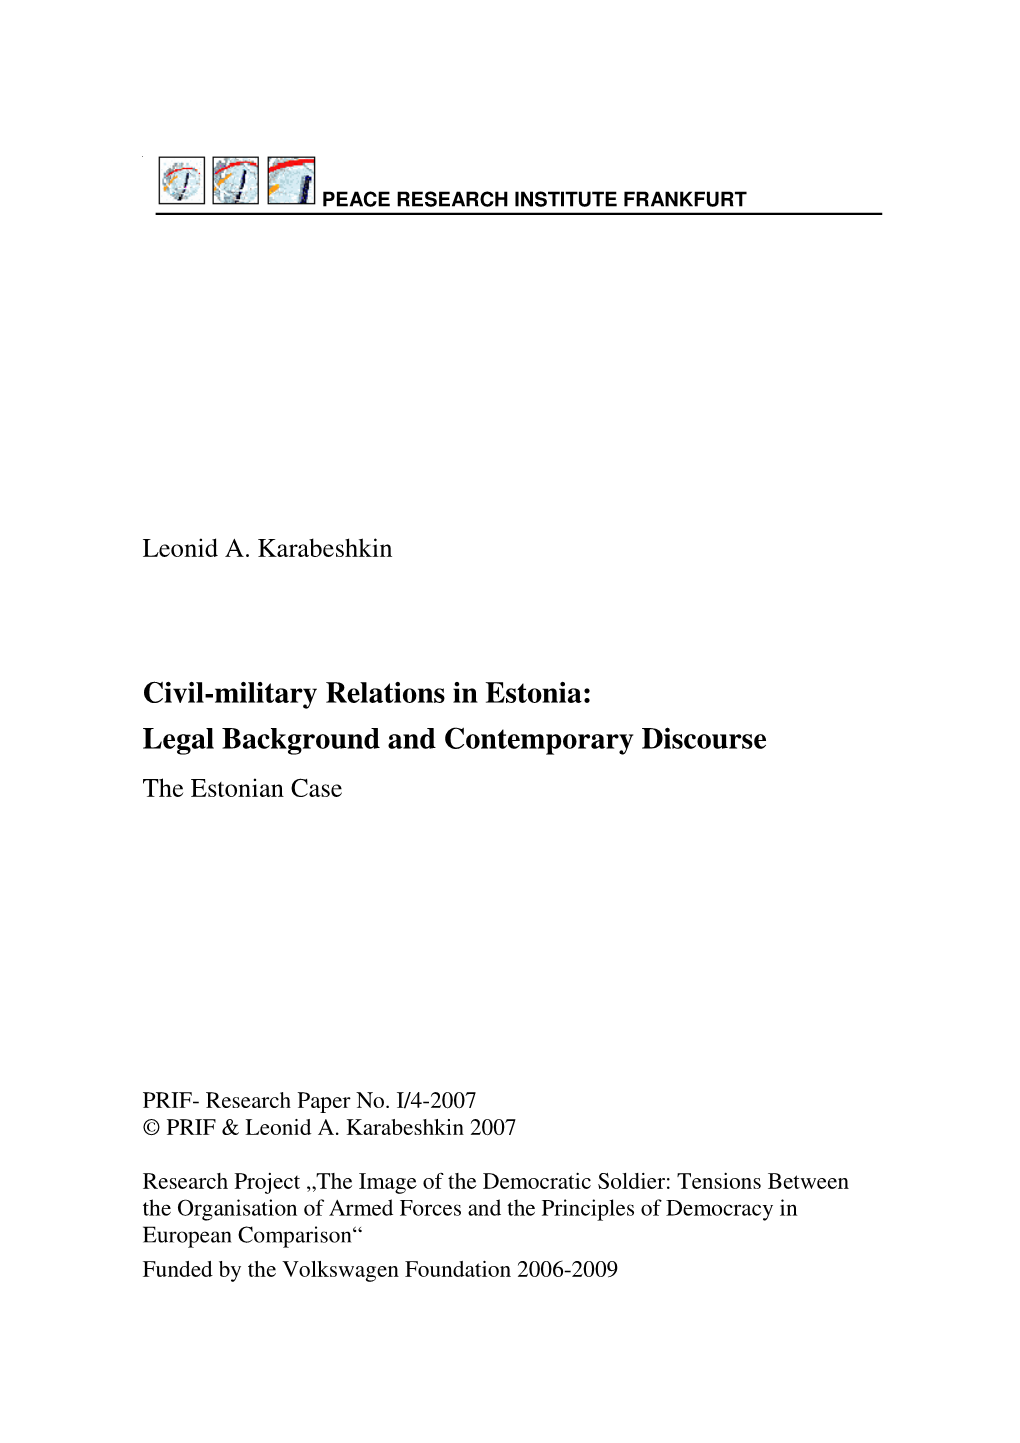 Civil-Military Relations in Estonia: Legal Background and Contemporary Discourse the Estonian Case